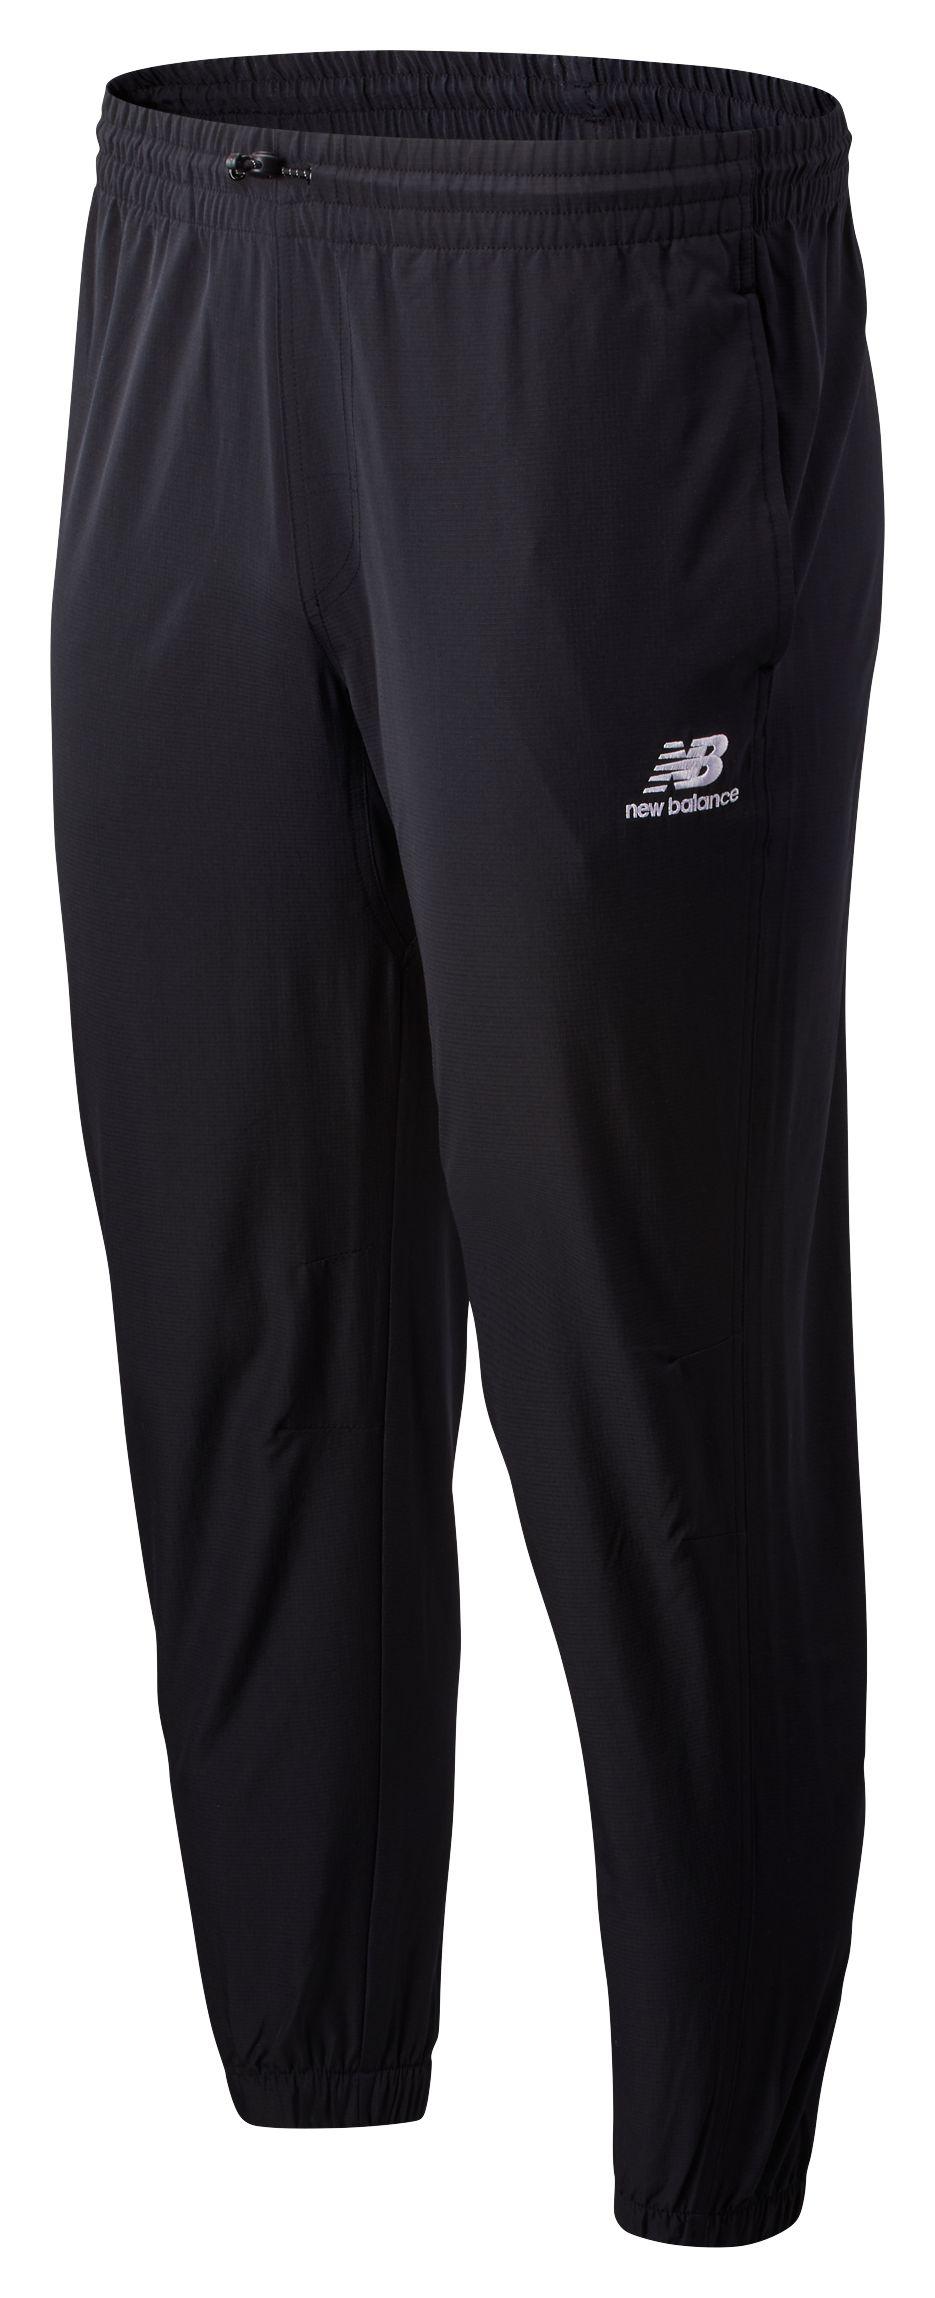 New Balance Nb Athletics Wind Pant in Black for Men - Lyst